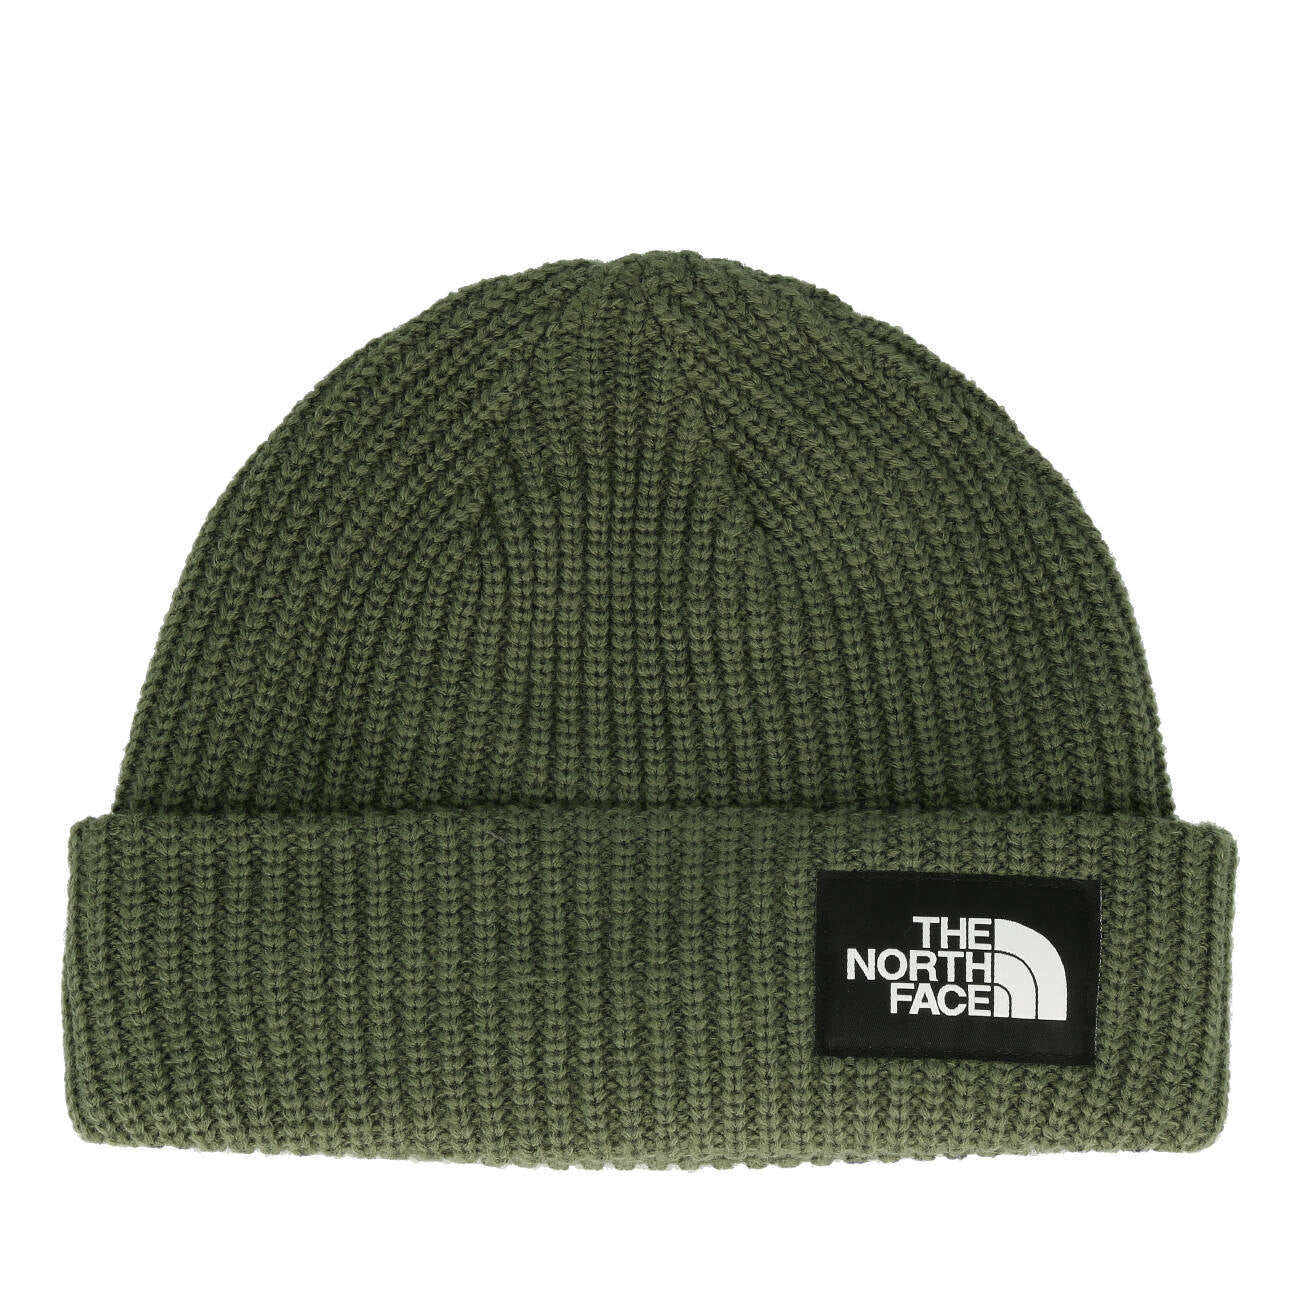 The North Face Salty Dog Beanie Thyme